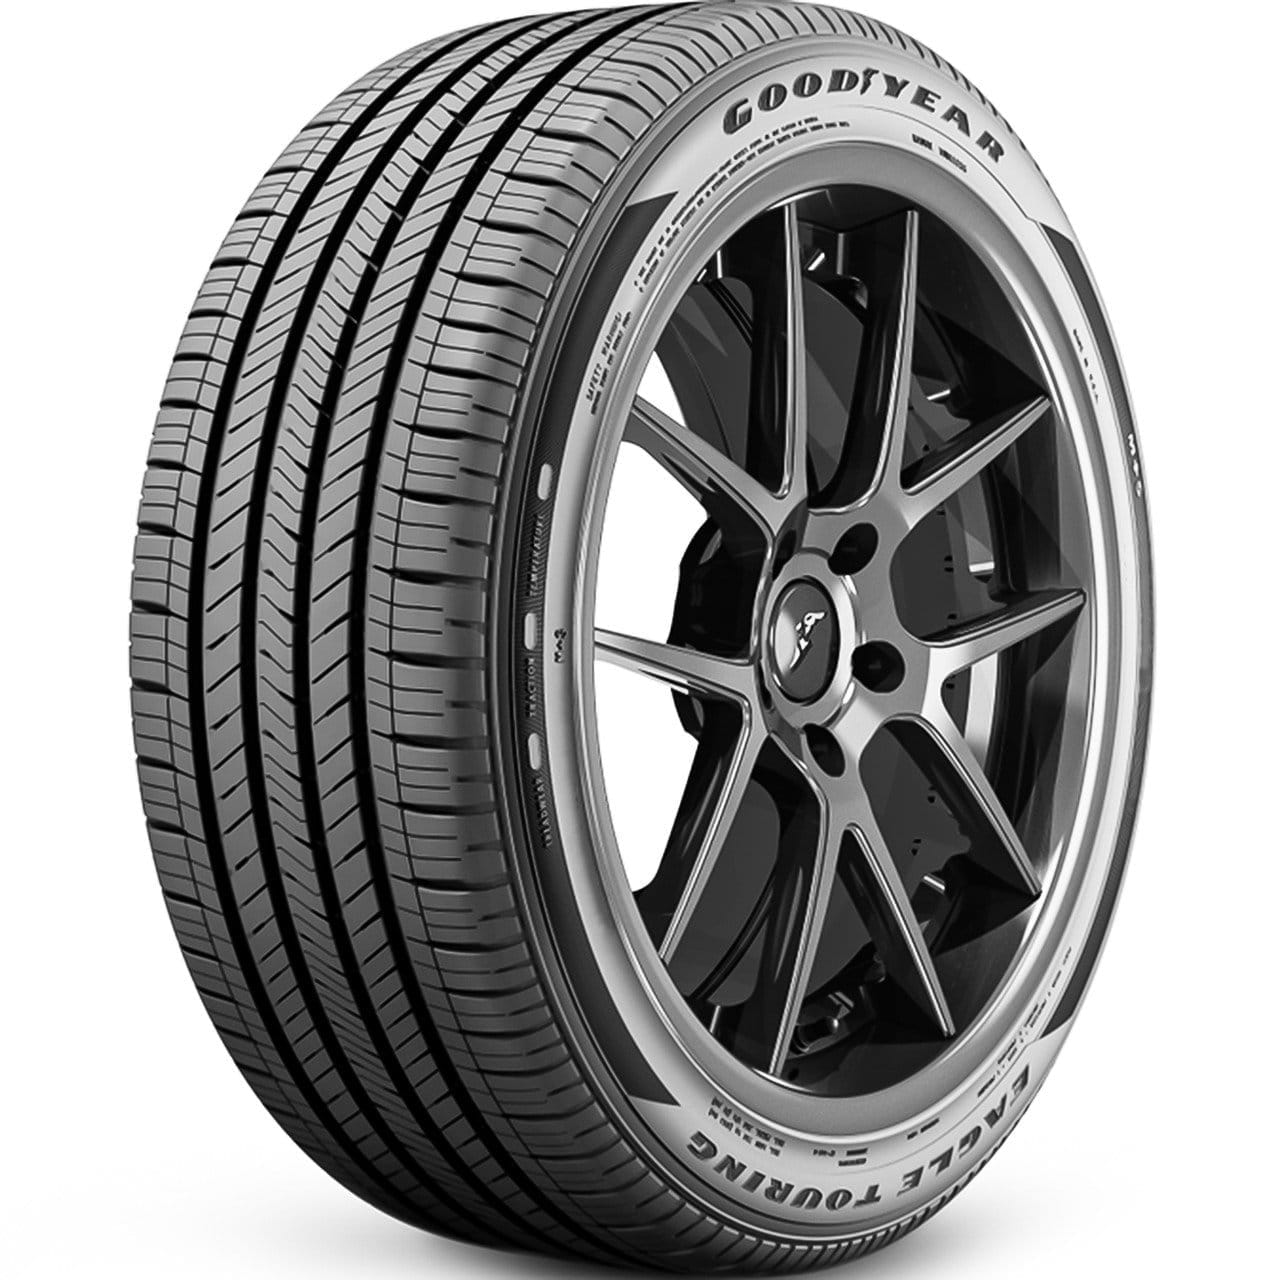 Image of Goodyear Eagle Touring 245/45R20 99V AS A/S All Season Tire